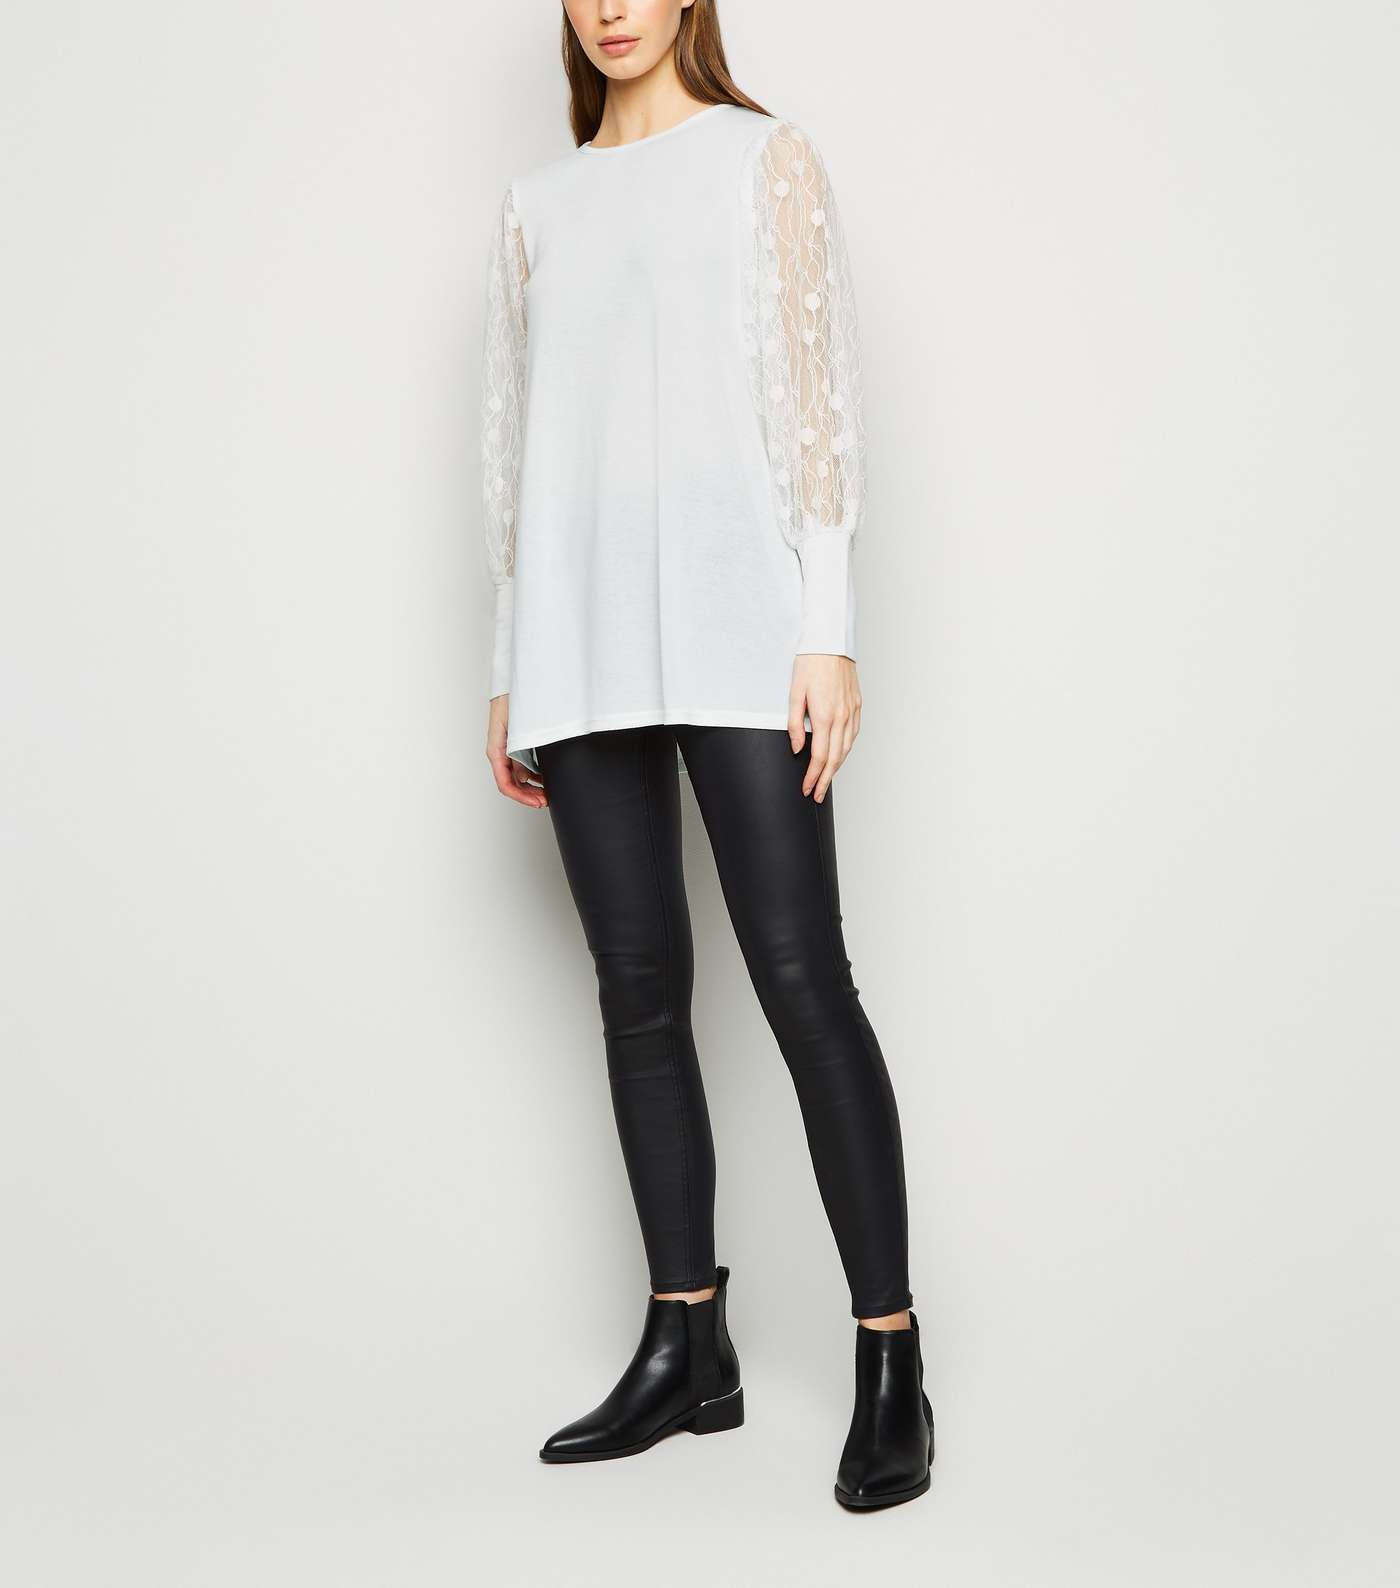 Blue Vanilla Off White Lace Sleeve Top Image 2